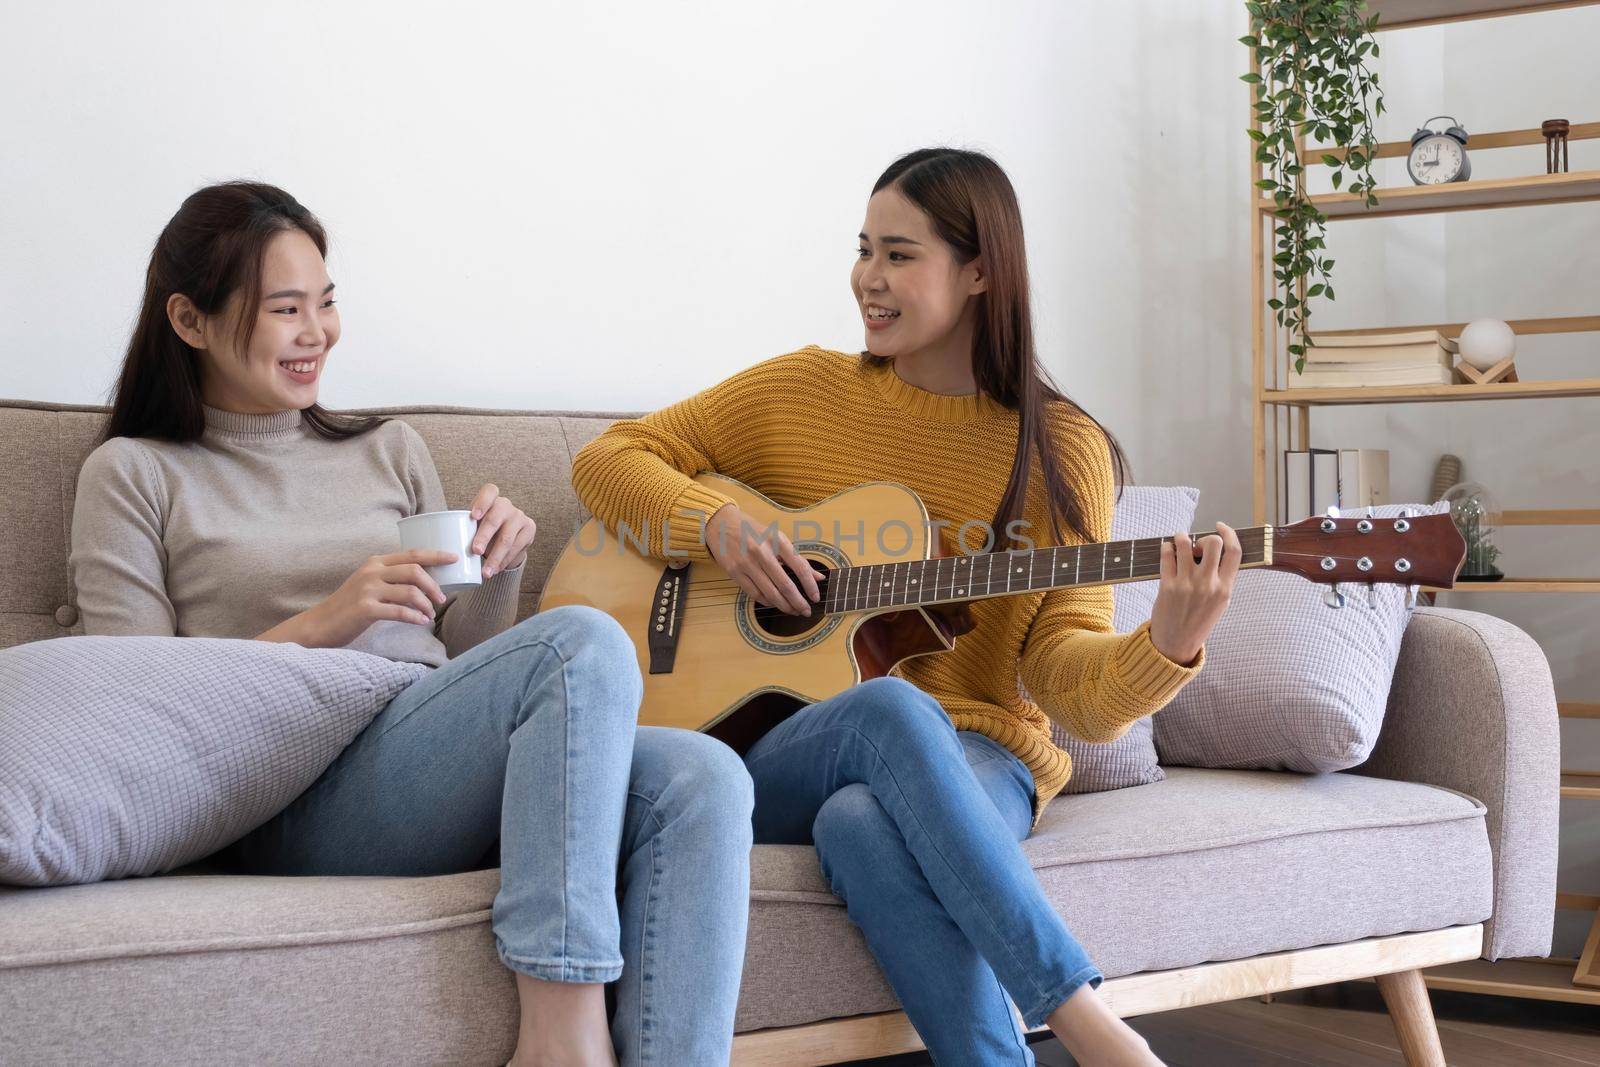 Asian girl friends play guitar together in the living room at home